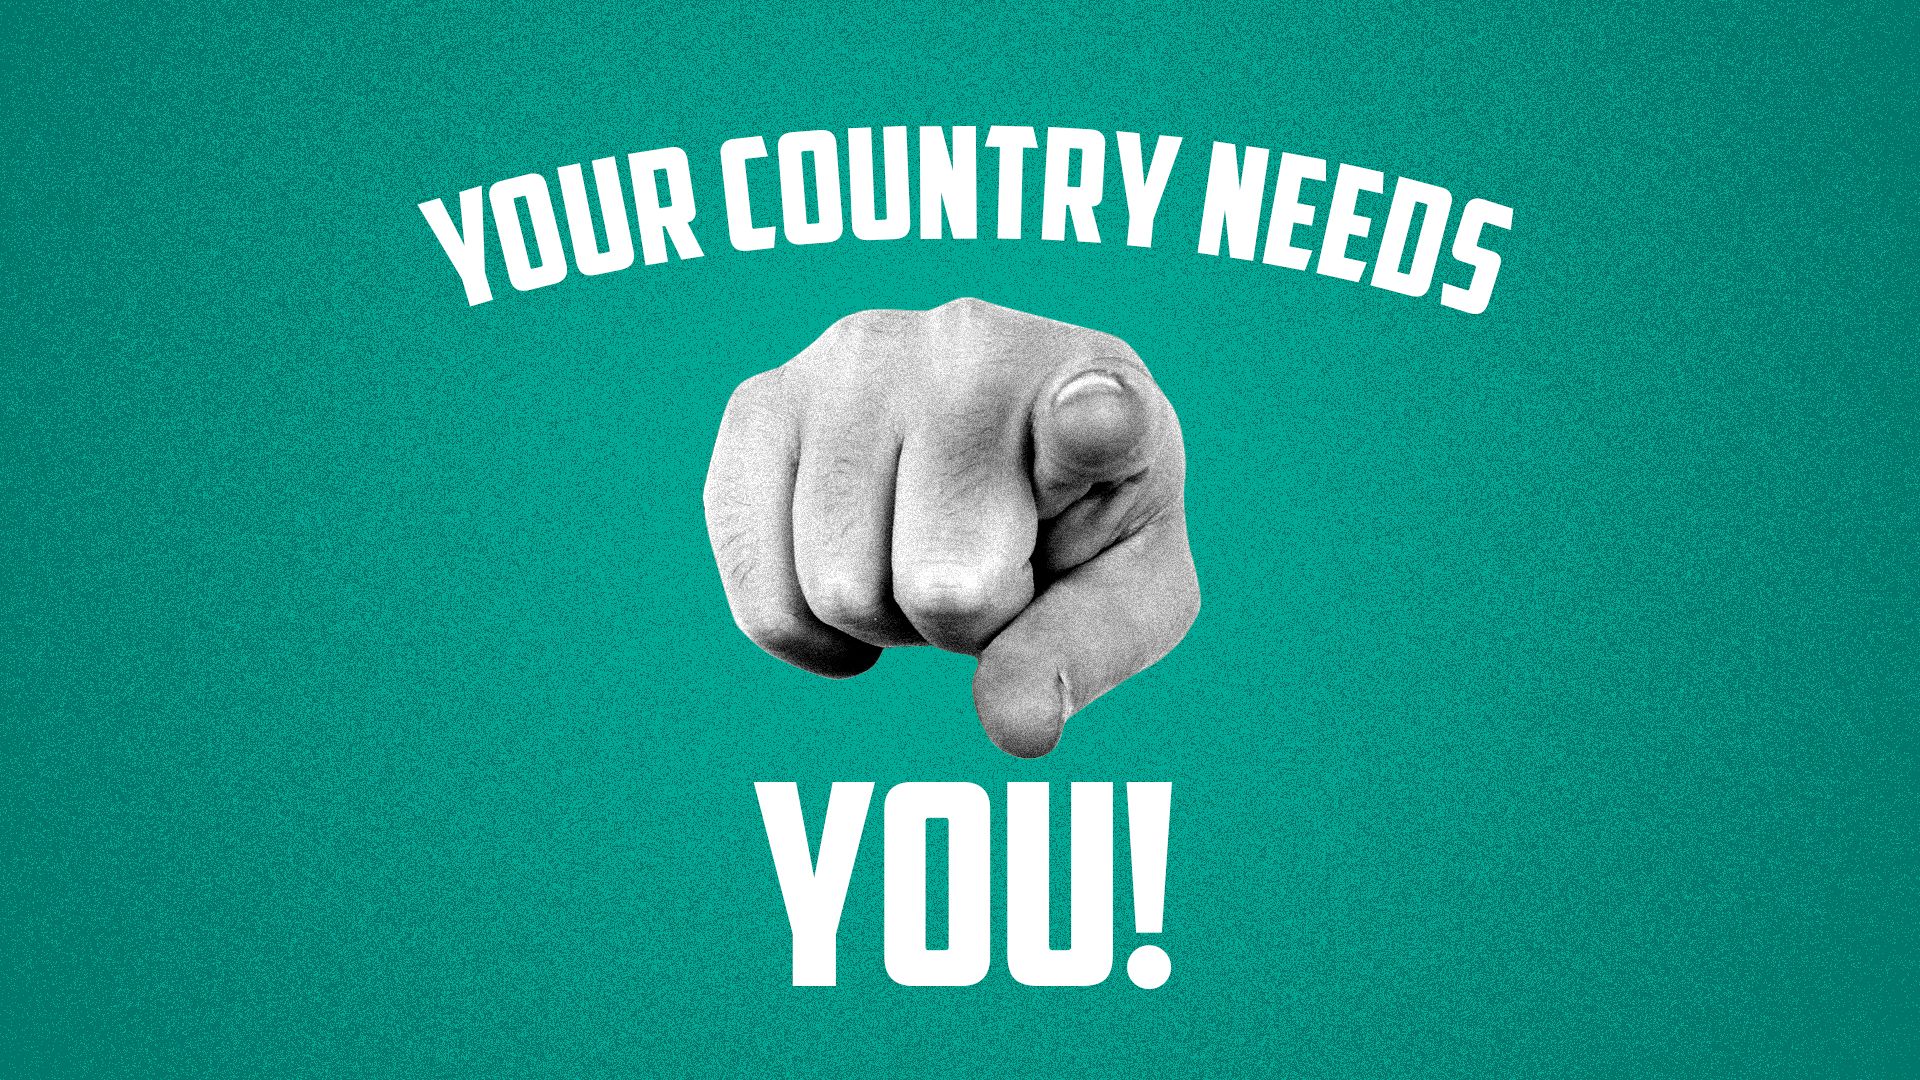 A illustration saying "your country need you!"